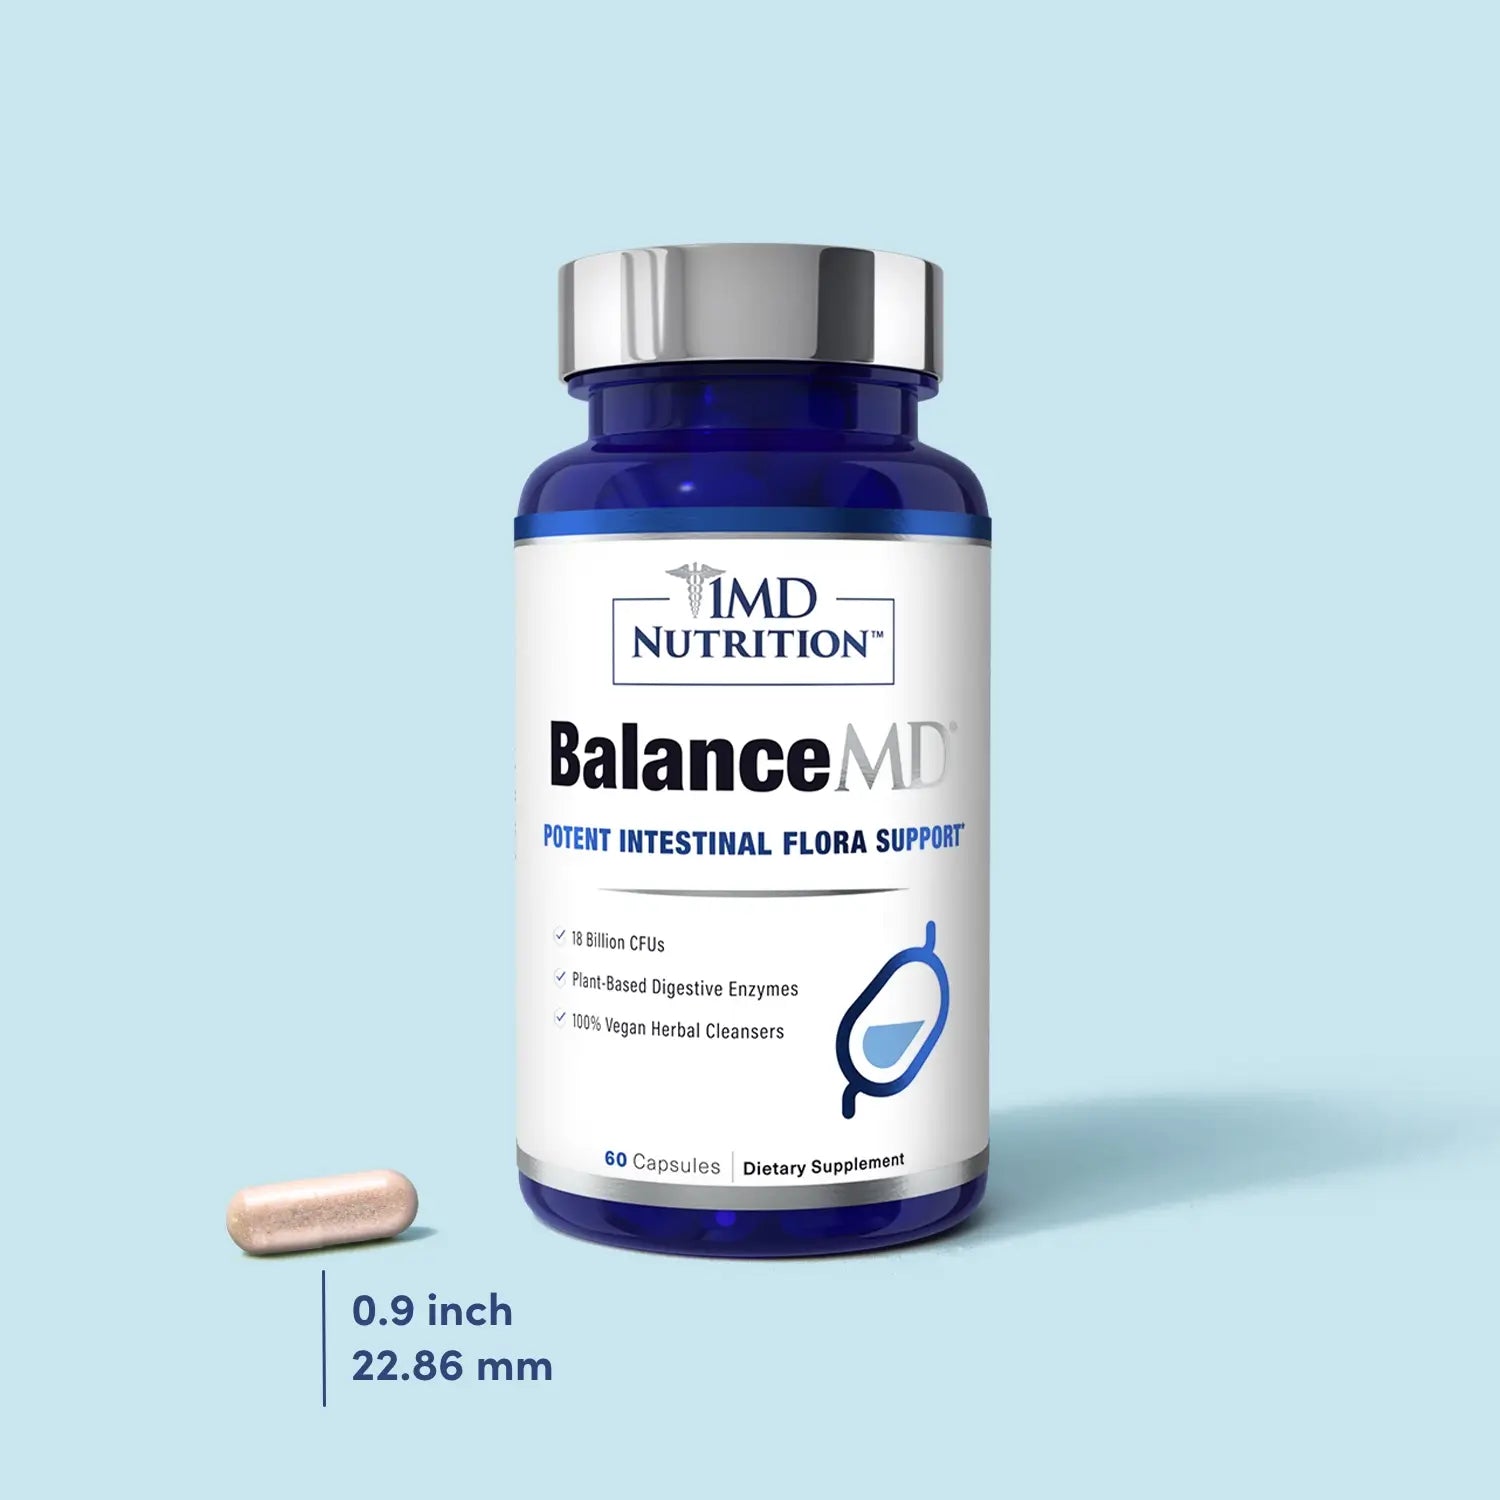 1MD Nutrition BalanceMD capsule size and bottle image